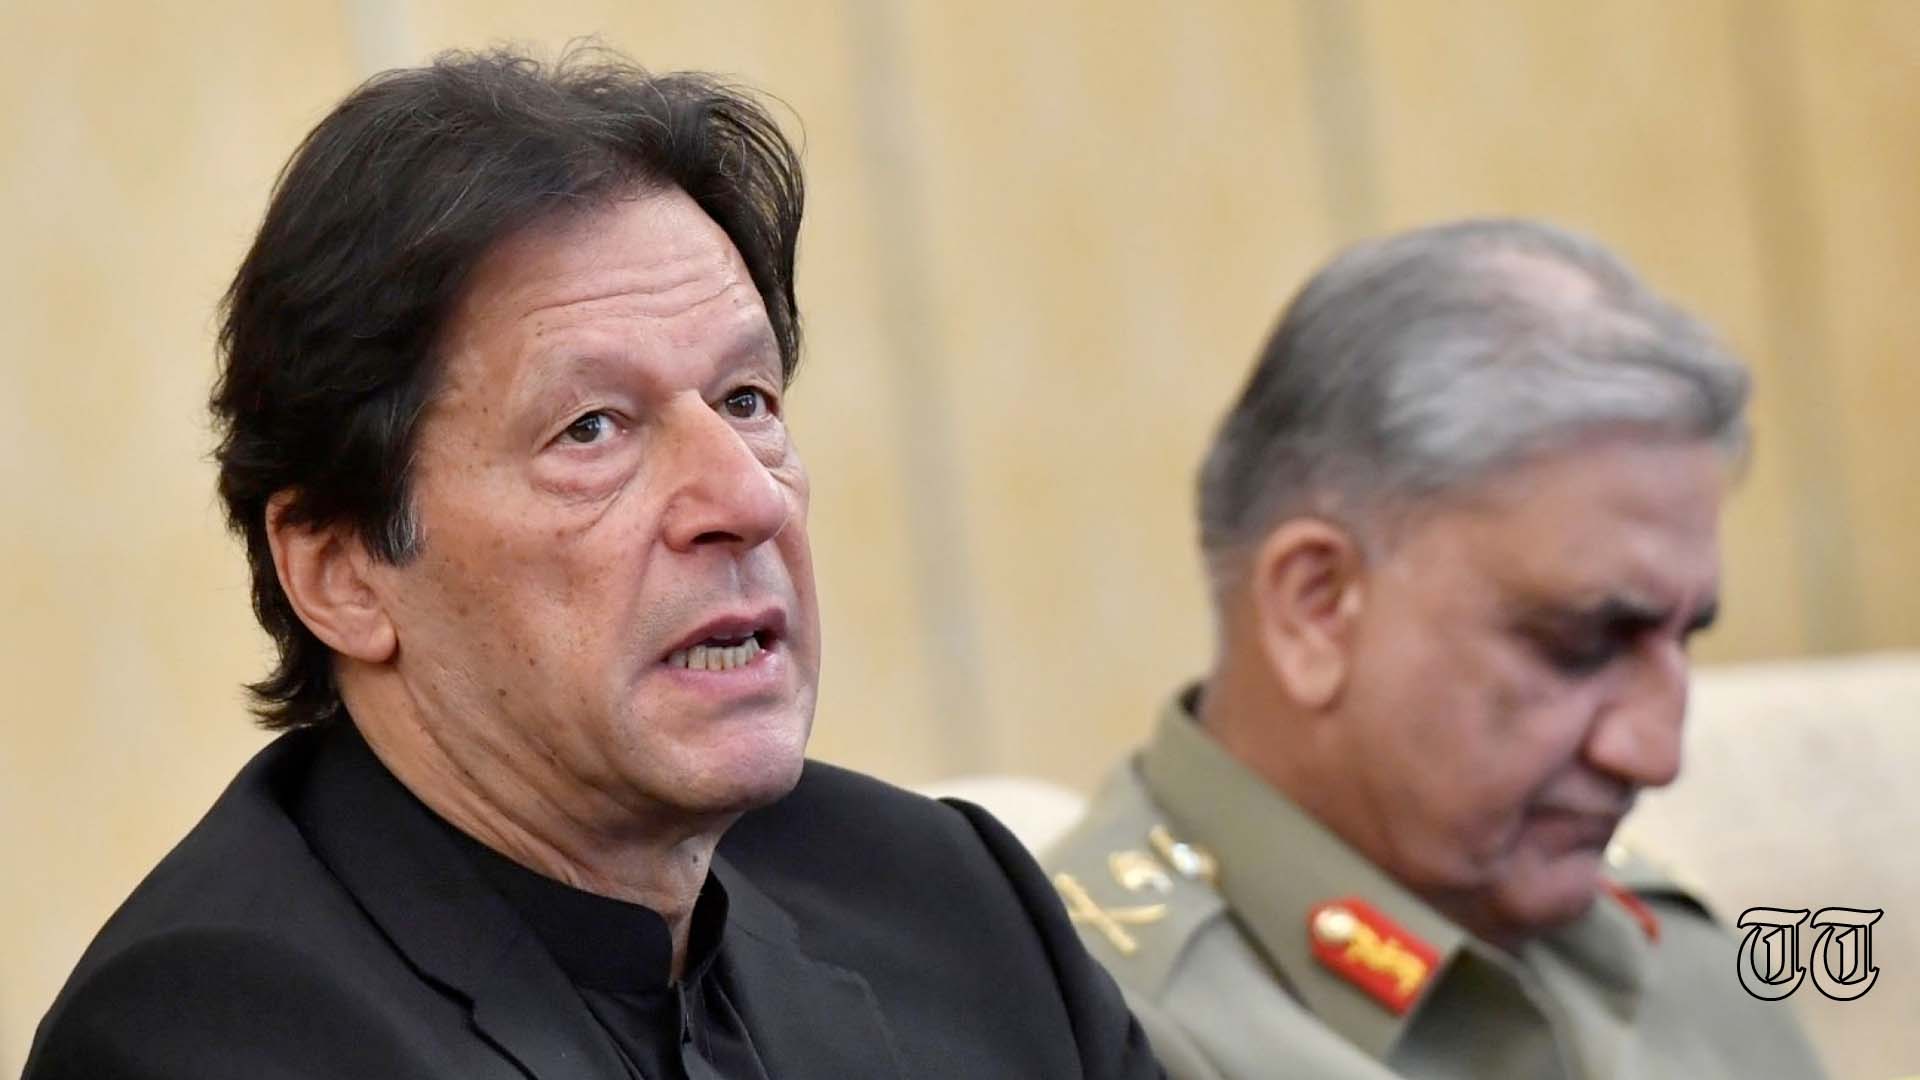 A file photo is shown of PTI president Imran Khan alongside former COAS General Bajwa at Beijing in 2019.